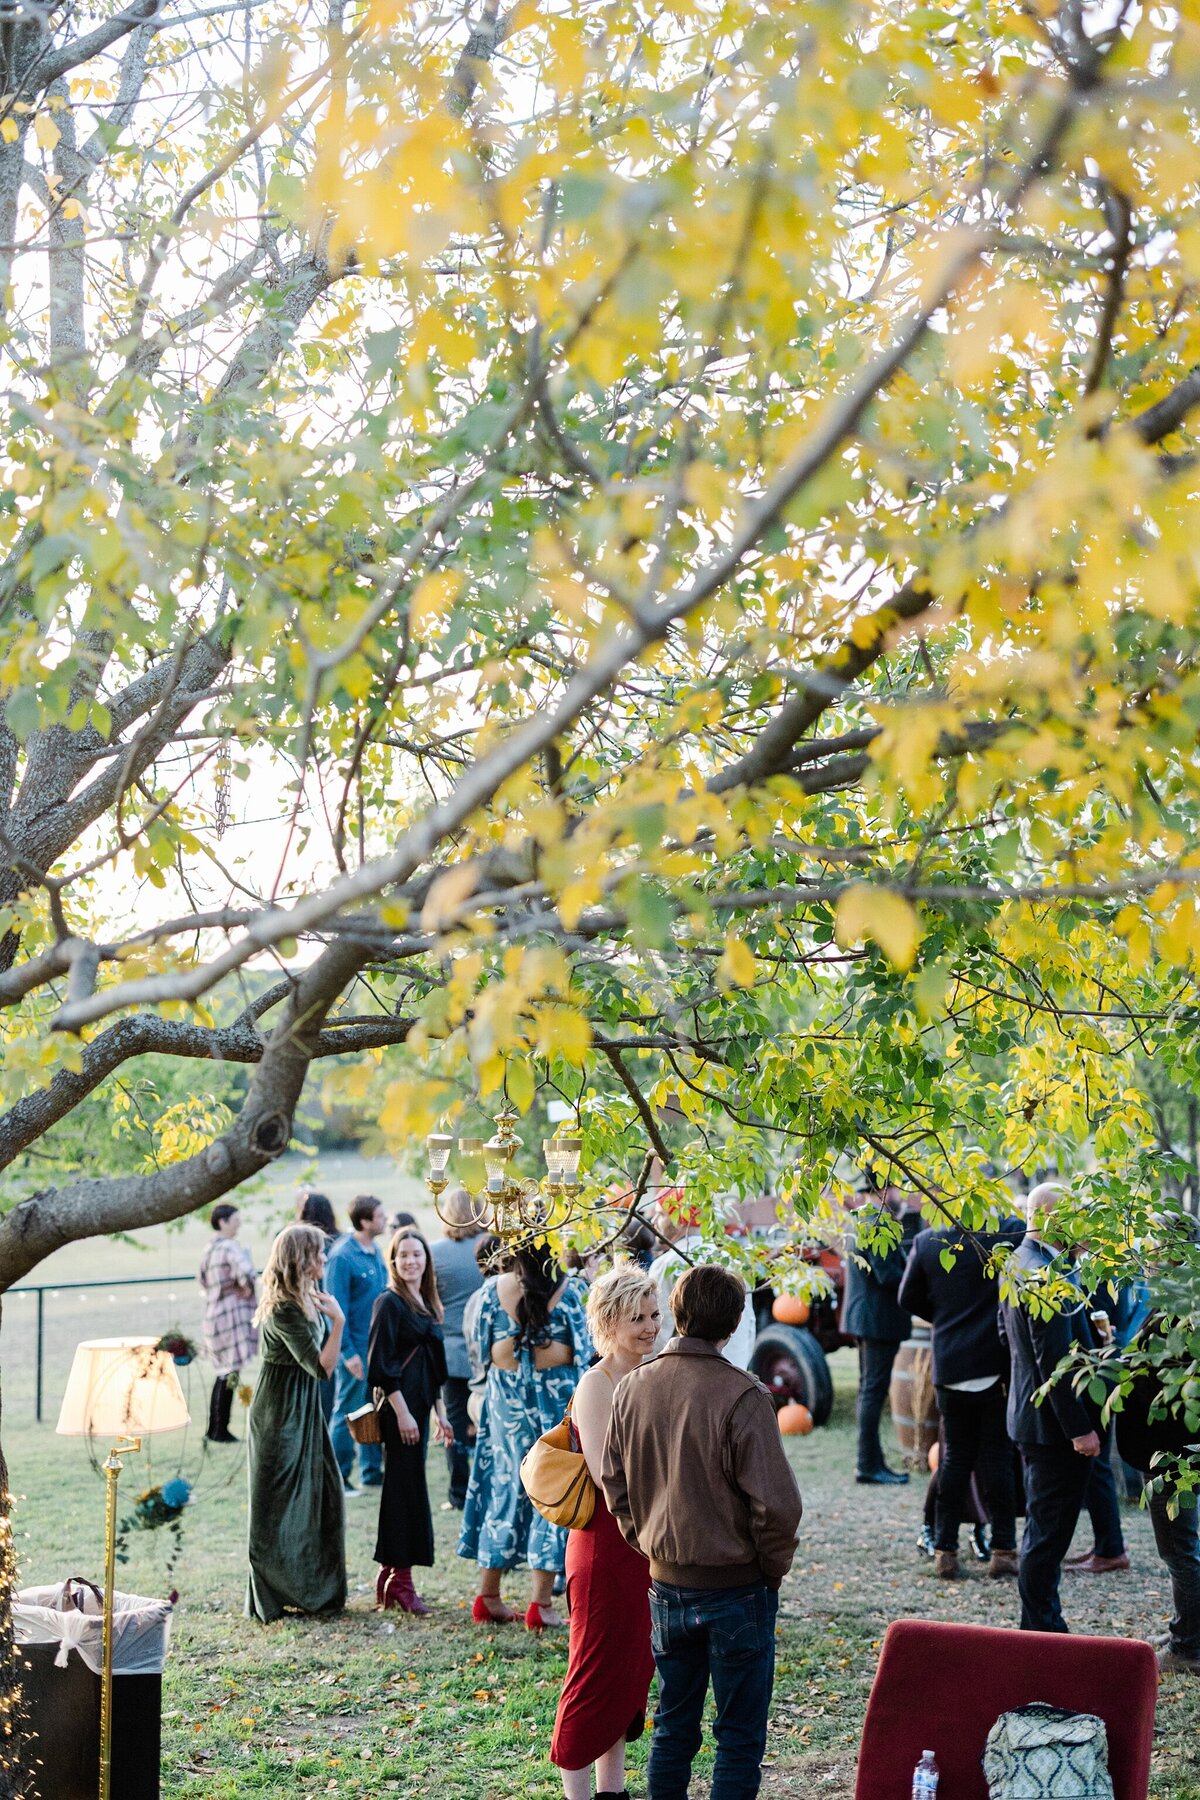 A candid moment of cocktail hour at a wedding in Fort Worth, Texas. Many guests mingle outside with a multitude of varying decorations. The whole scene is framed by a large tree branch.